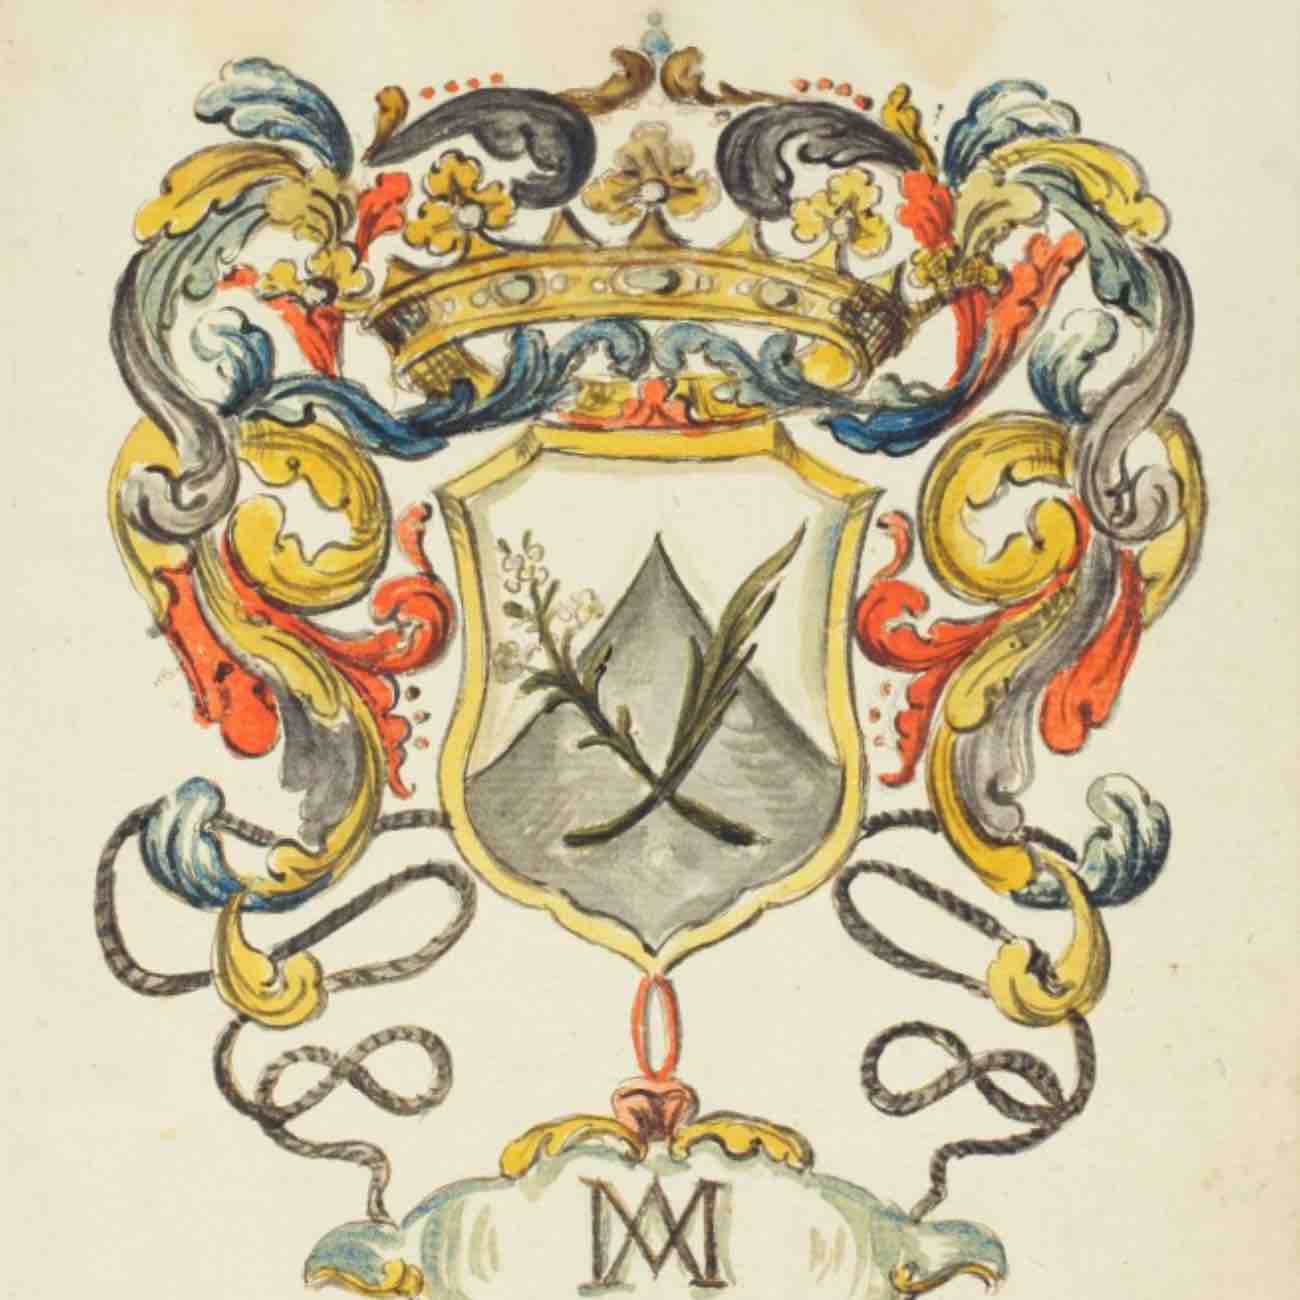 Coat of arms of the Archconfraternity of Our Lady of Mount Carmel (<a href='https://w3id.org/vhmml/readingRoom/view/236567'>ACMC 00030</a>)